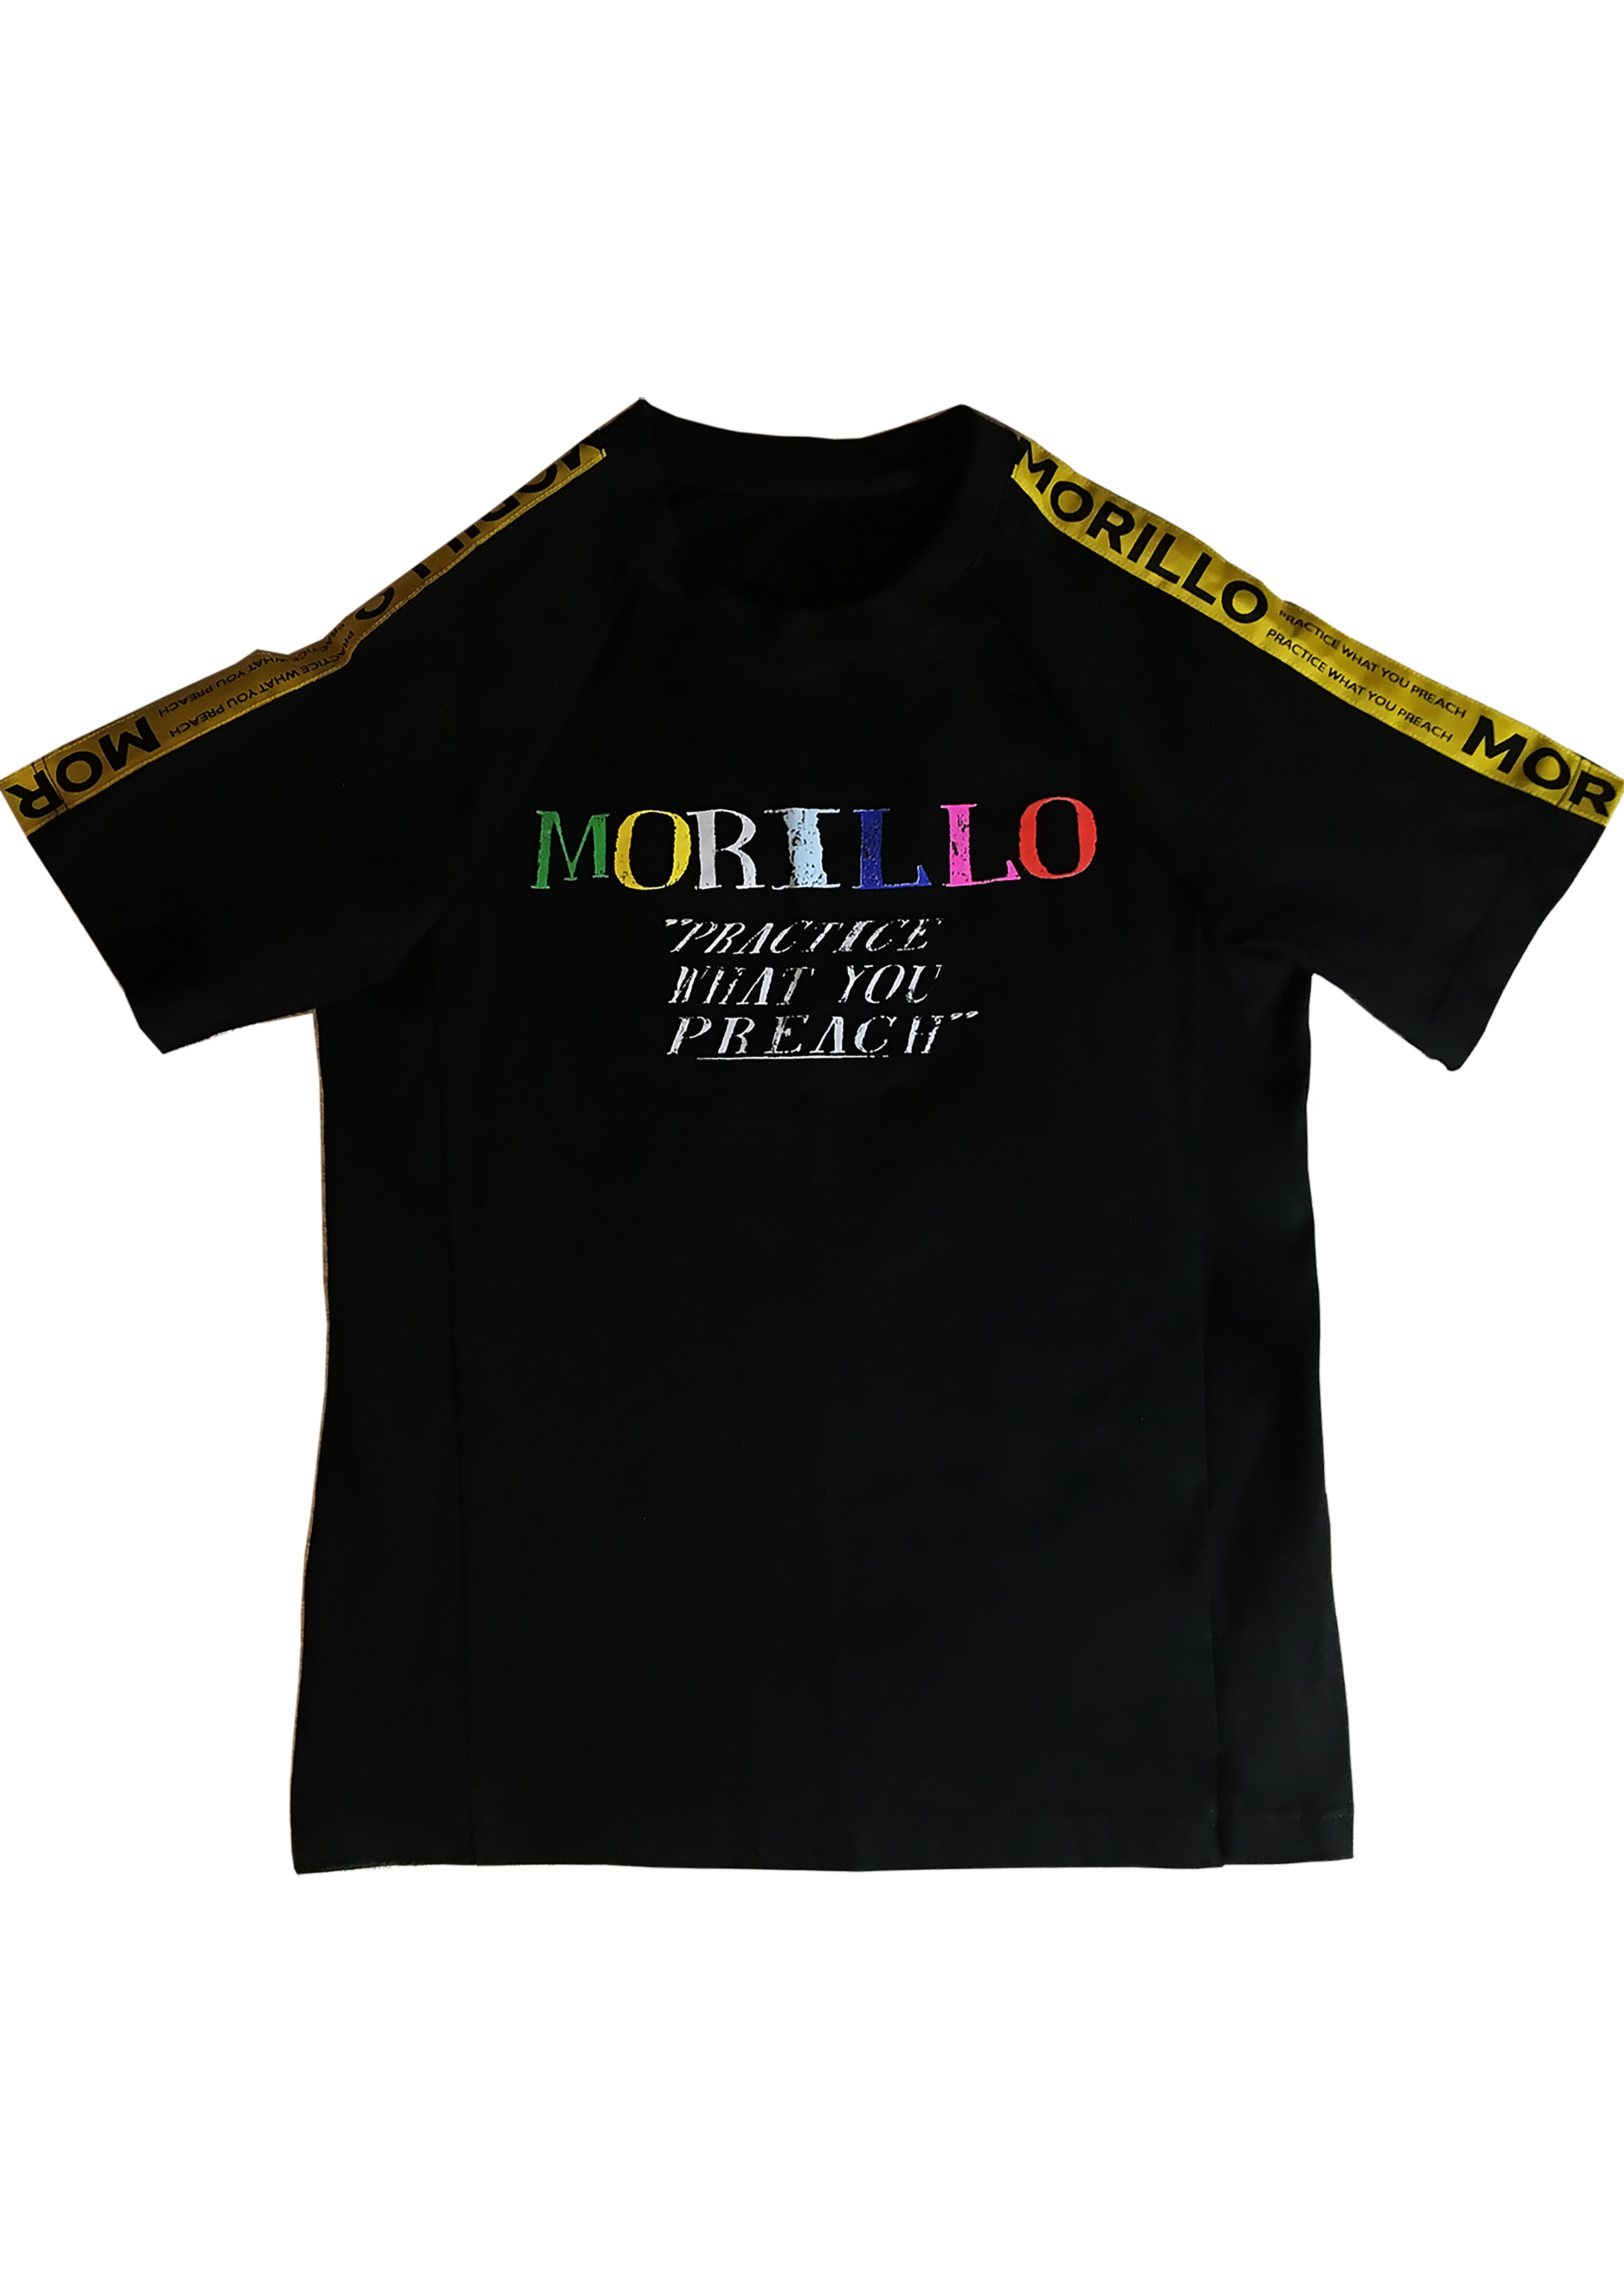 CHALKED GRAPHIC WITH TAPED LOGO T-SHIRT T-Shirts, Crewneck - MORILLO ENTERPRISE 